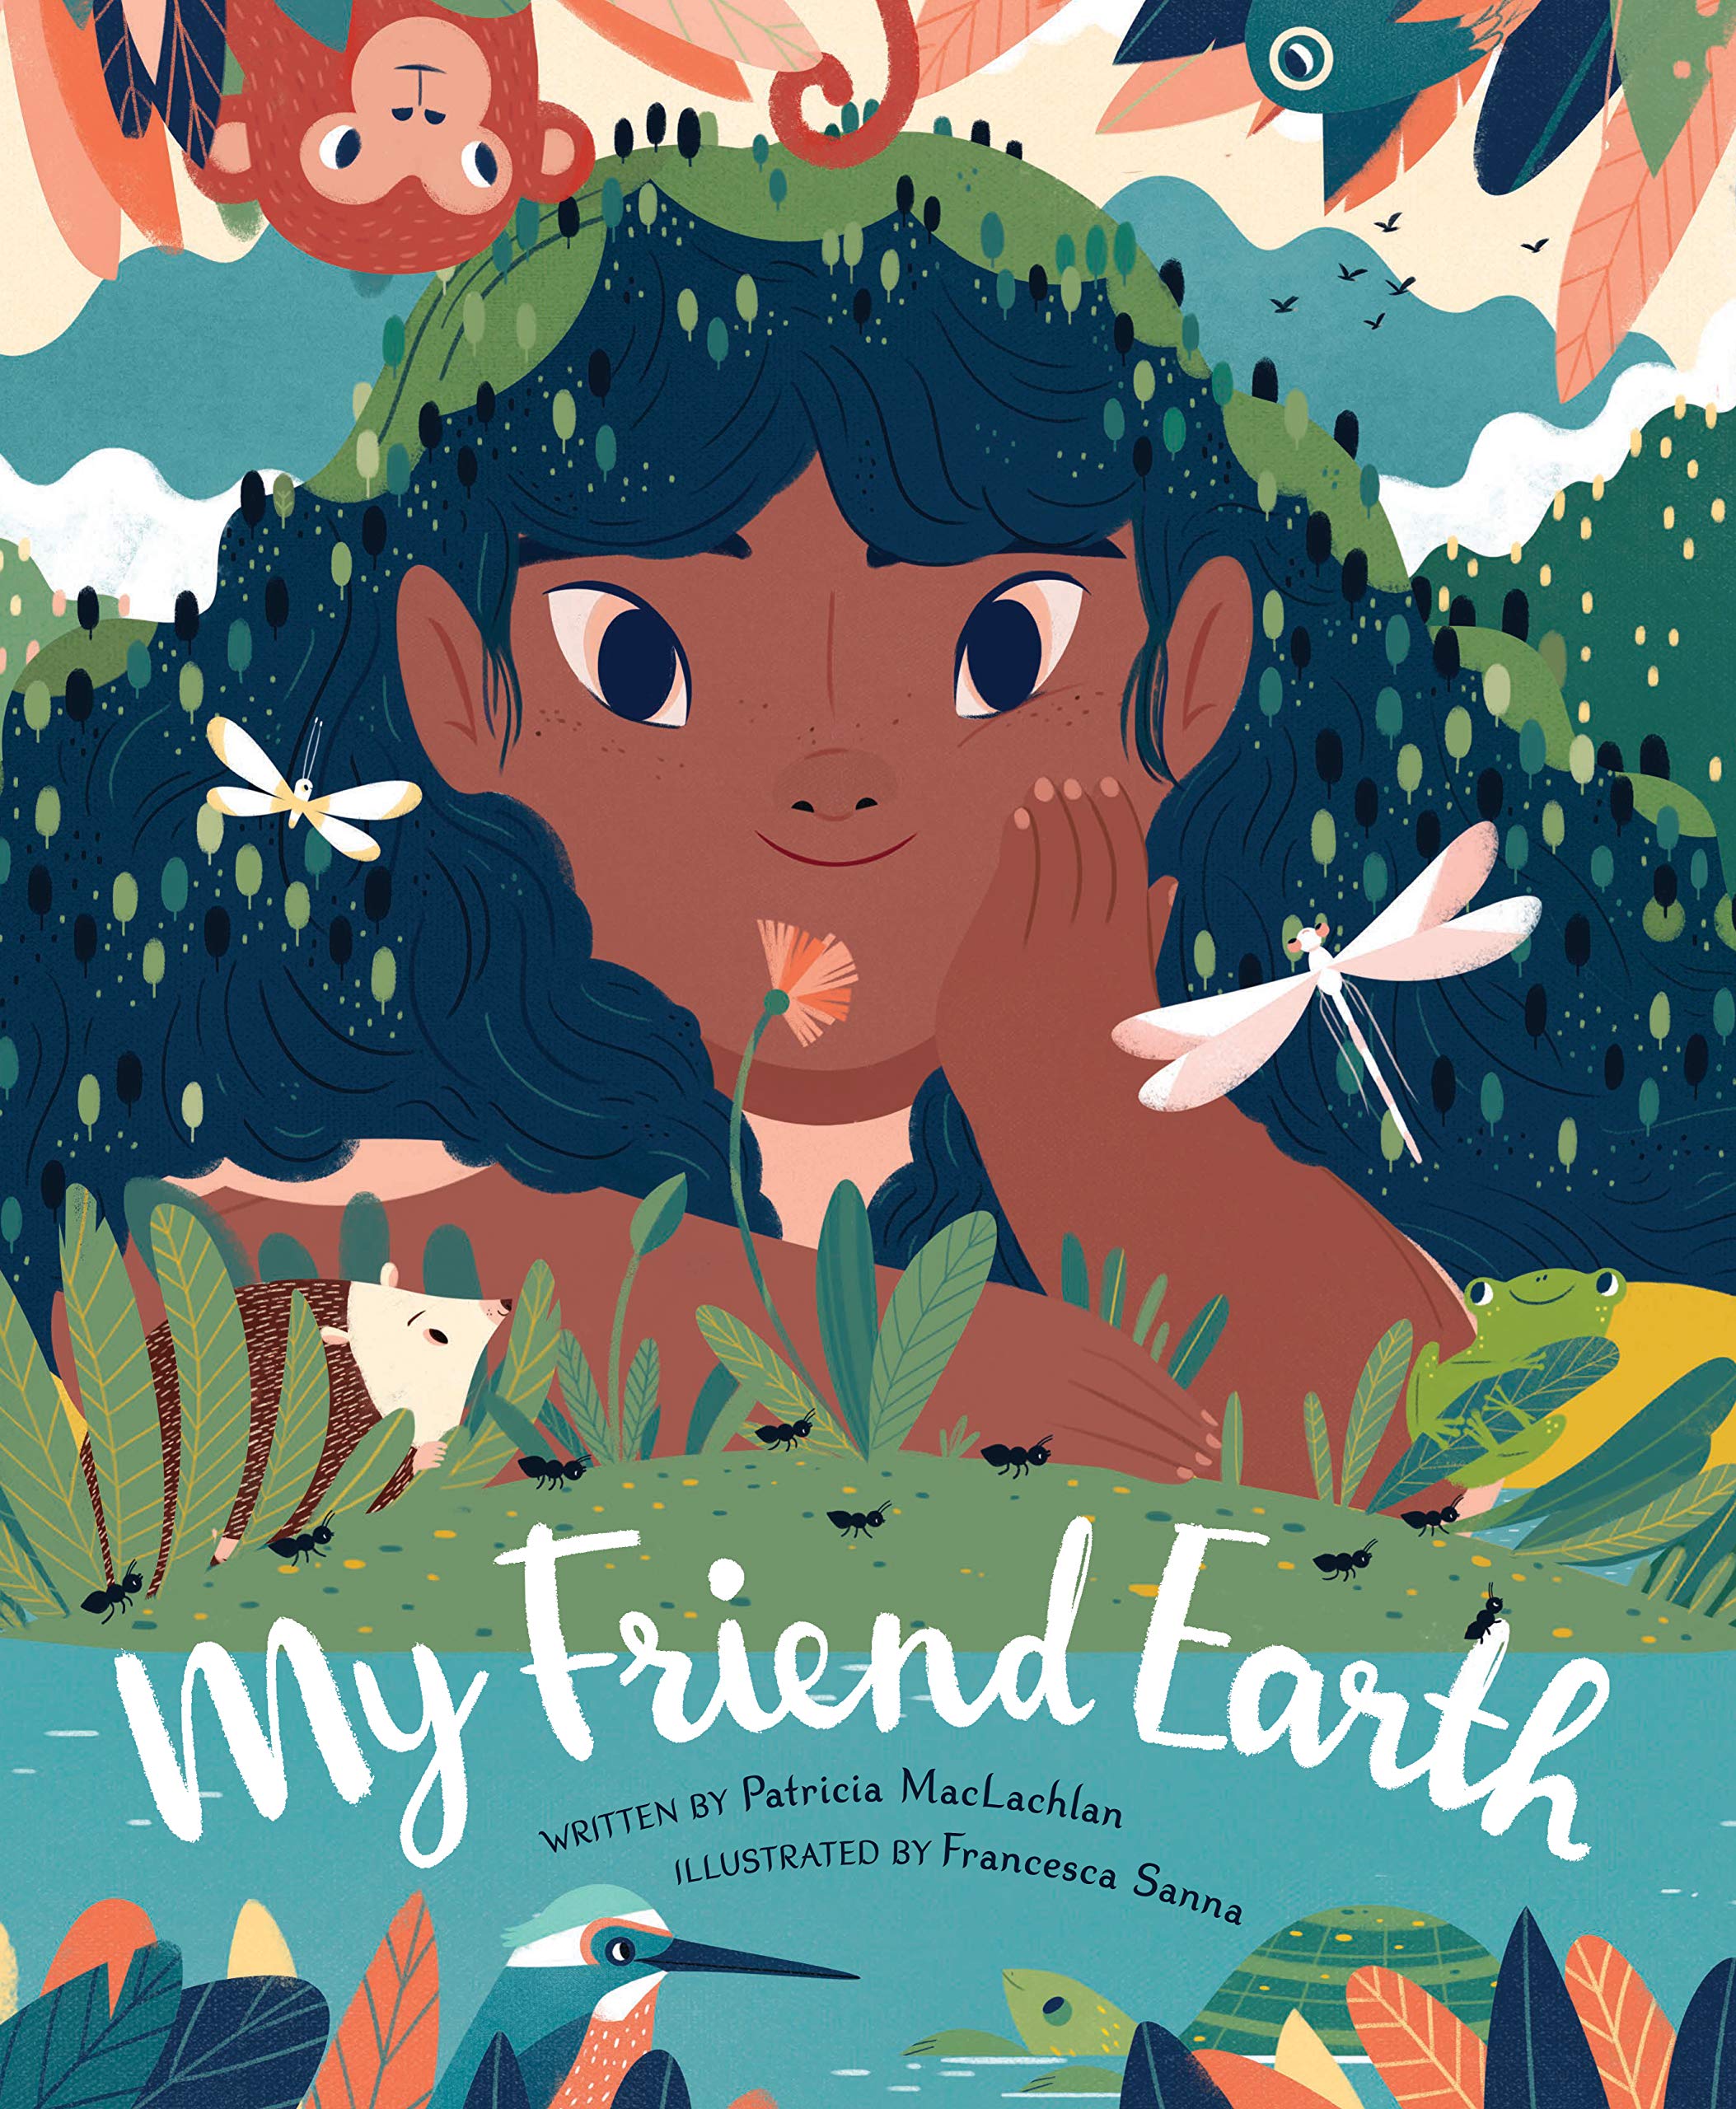 My Friend Earth (Earth Day Books with Environmentalism Message for Kids, Saving Planet Earth)